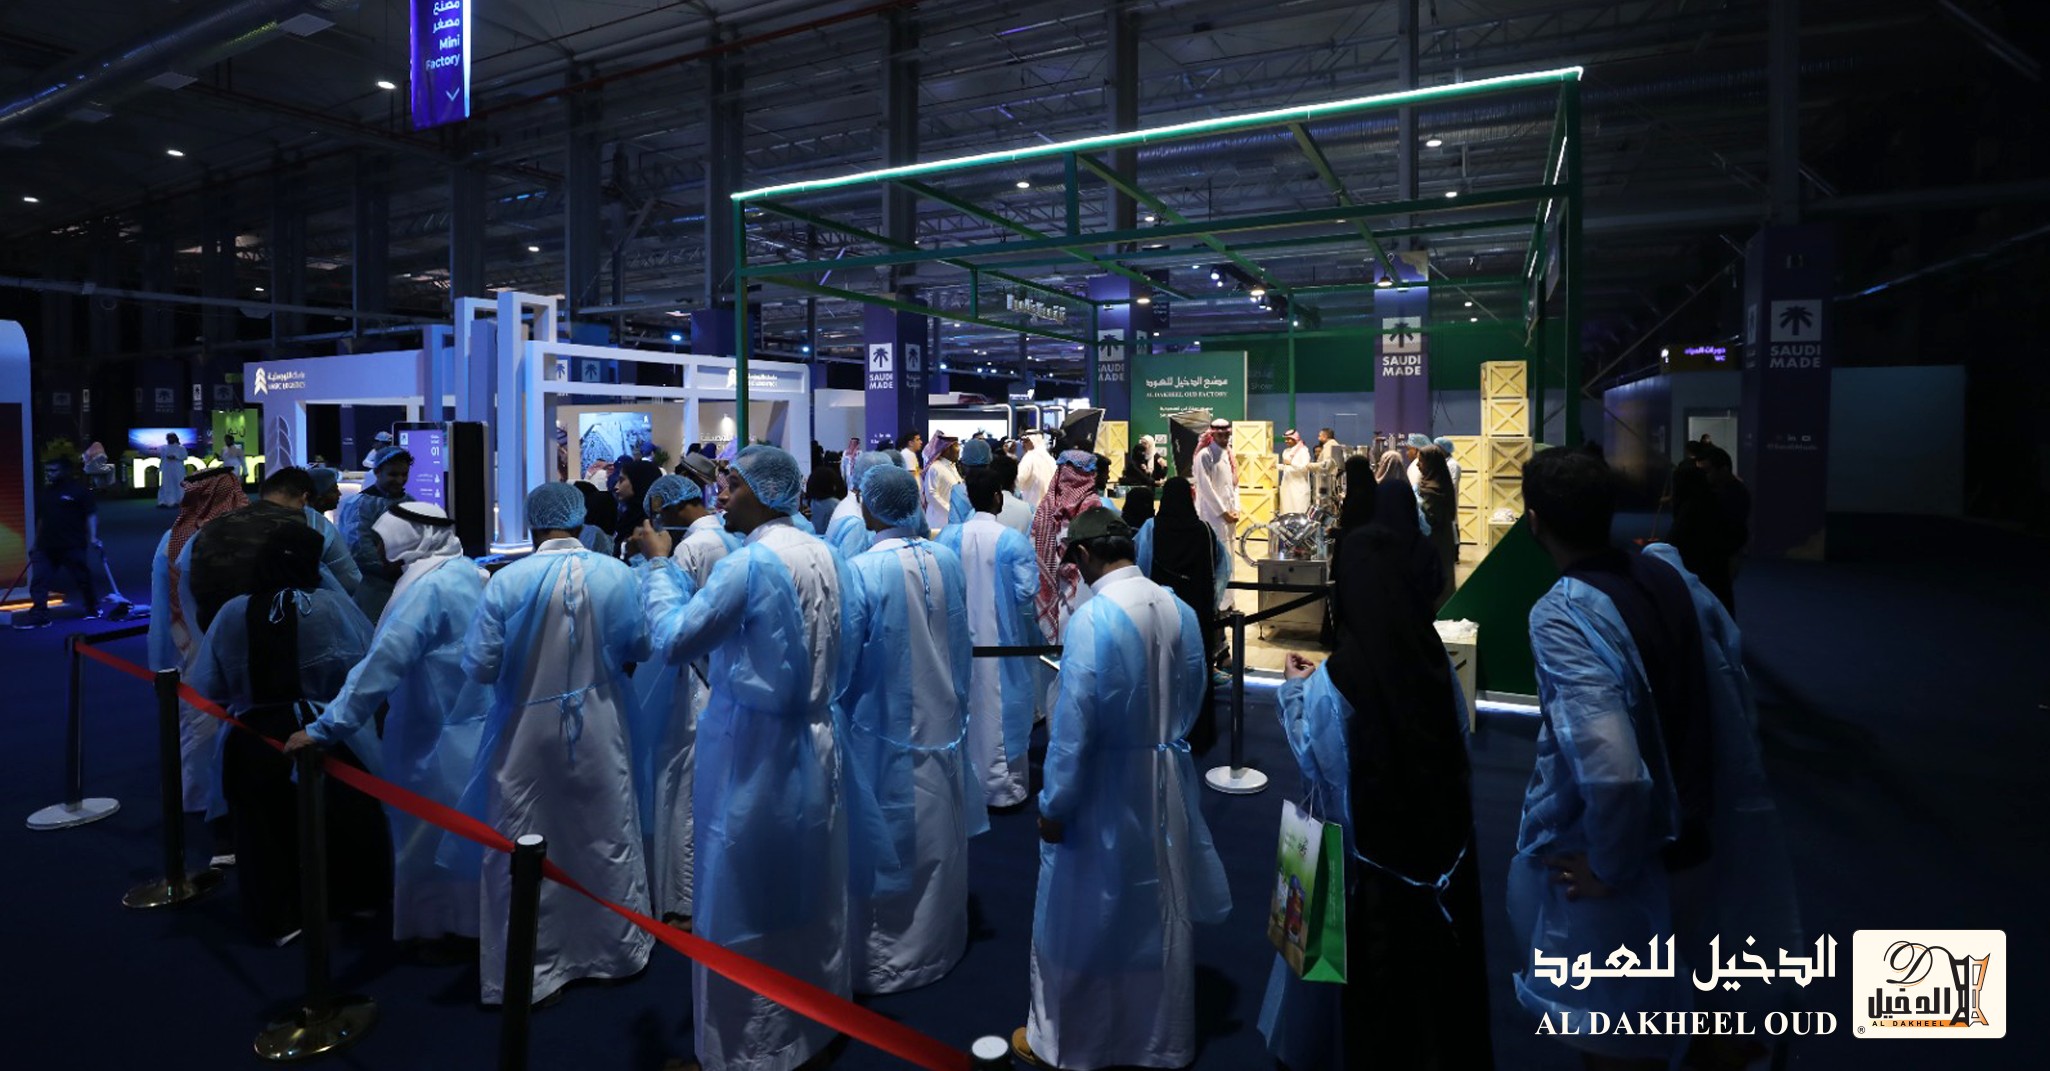 Aldakheel Oud Factory Participates in the Second Edition of Saudi Made Exhibition"